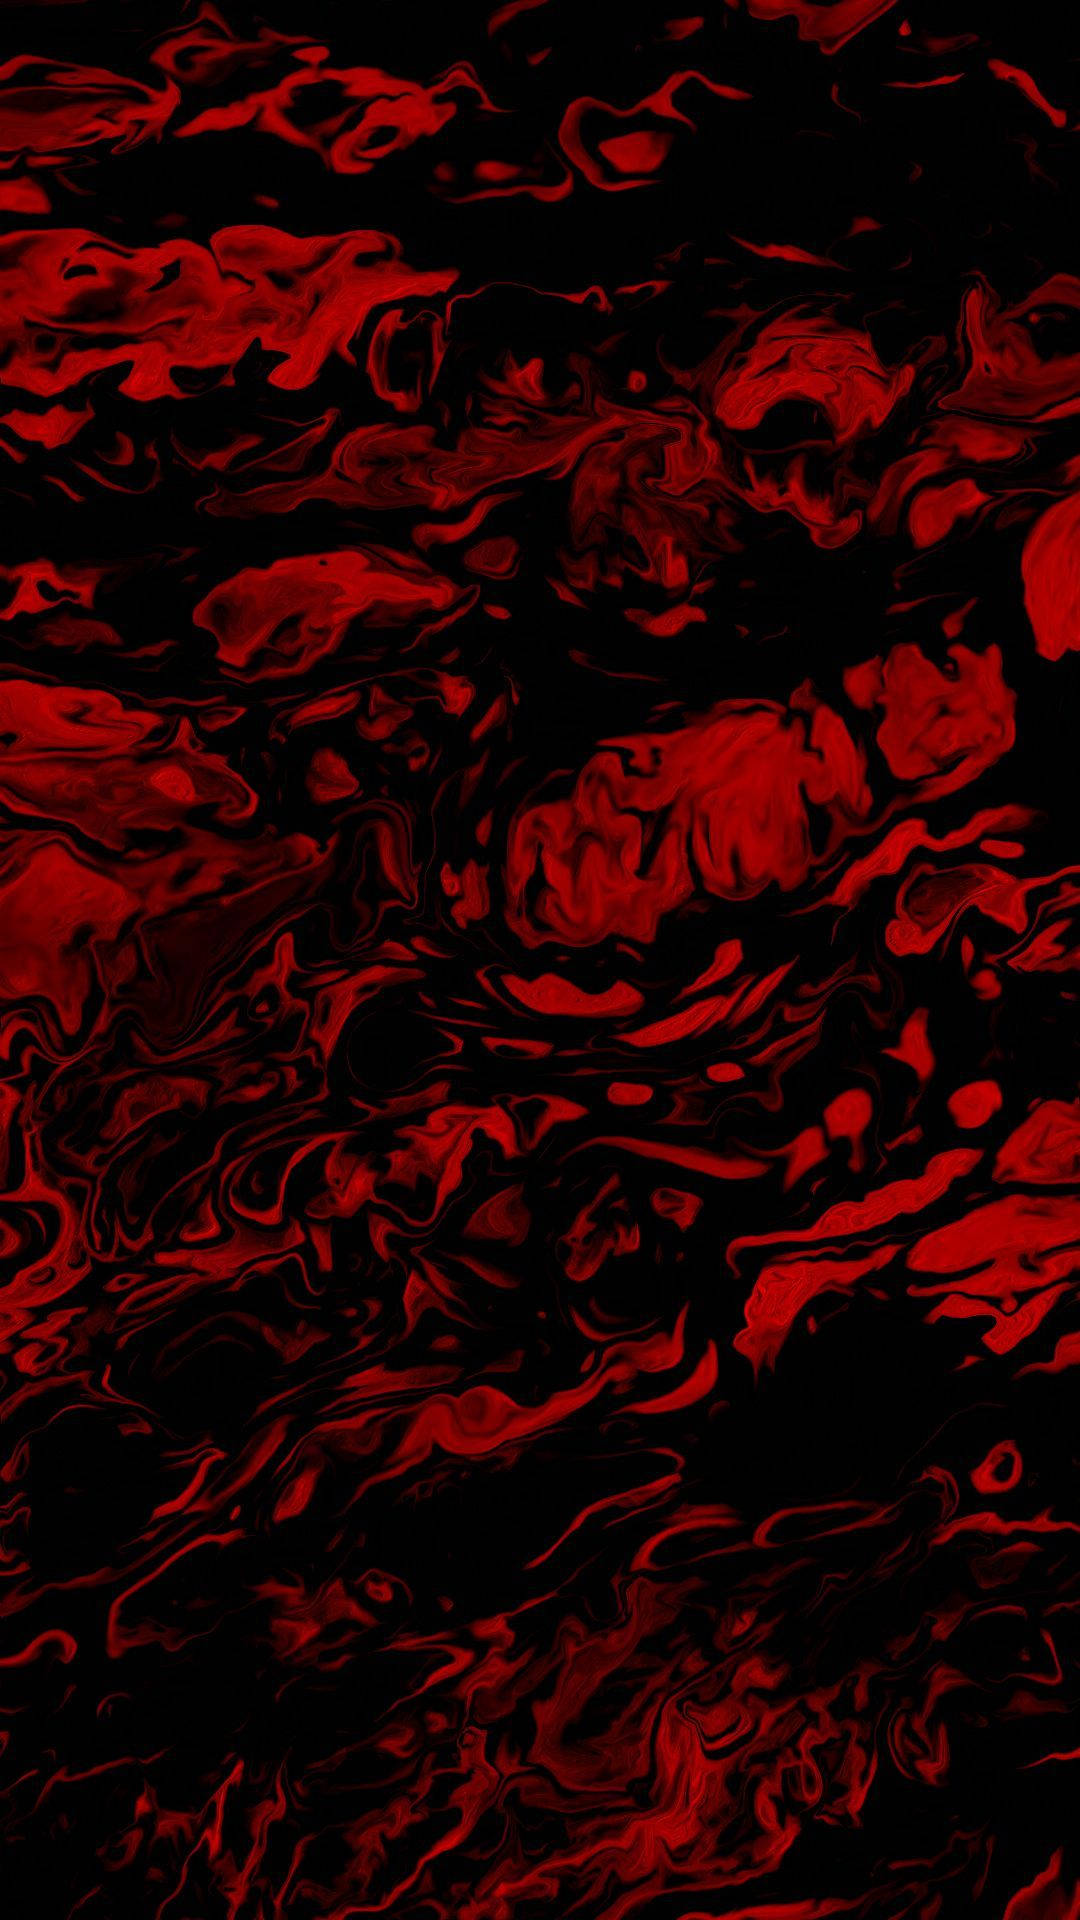 "iPhone in a striking Red and Black colorway" Wallpaper